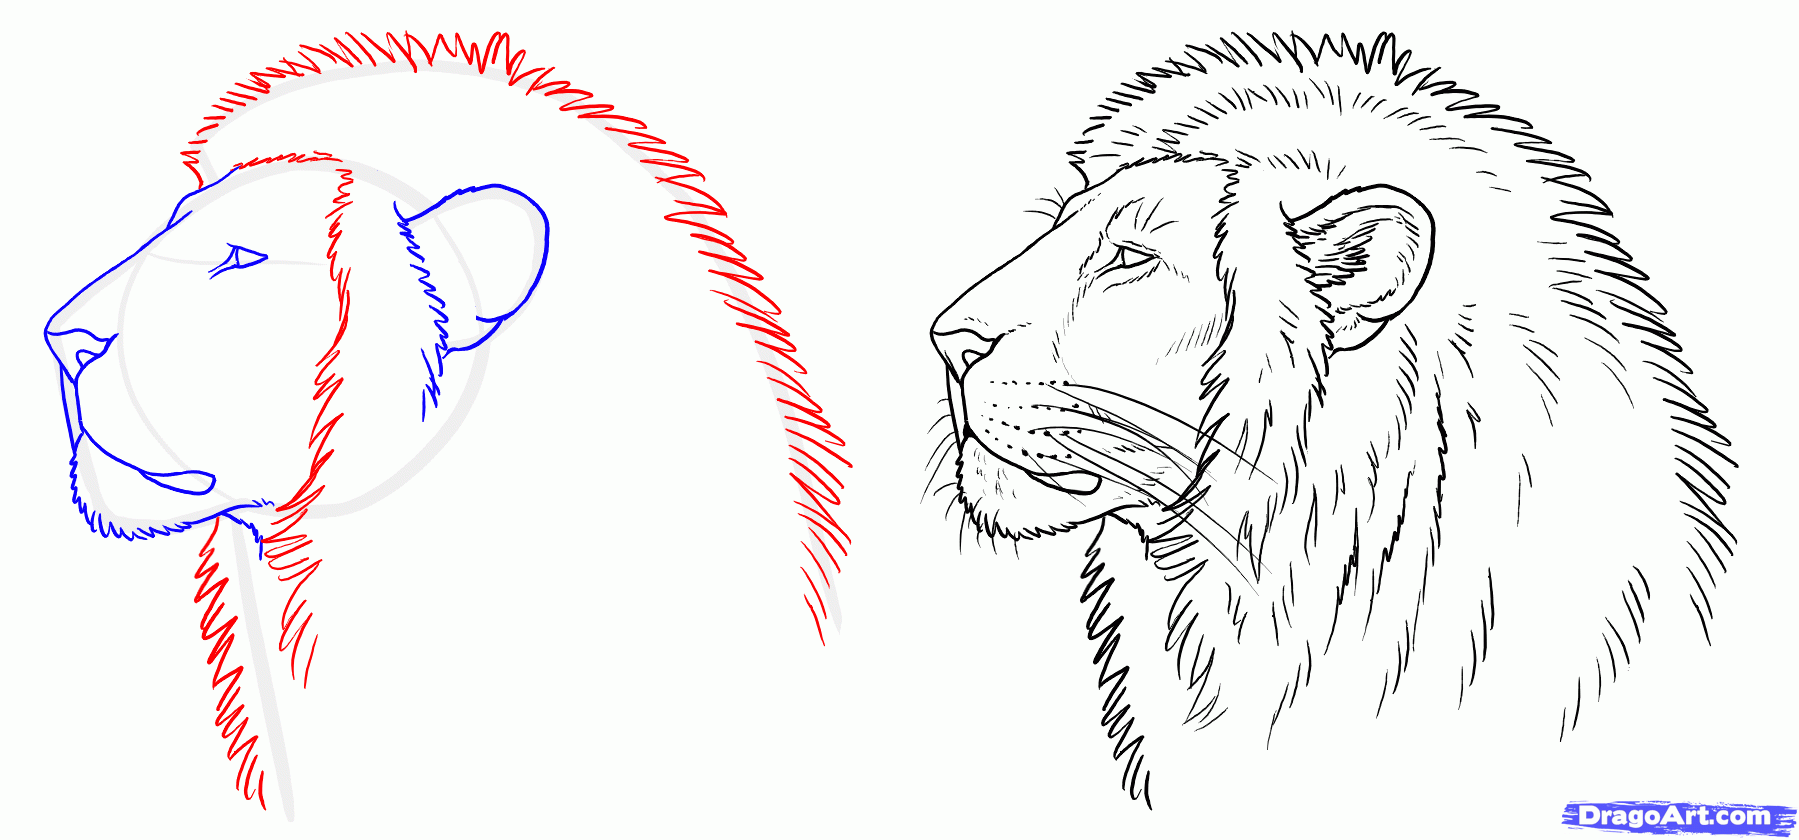 How to Draw a Real Lion, Draw Lions, Step by Step, safari animals ...